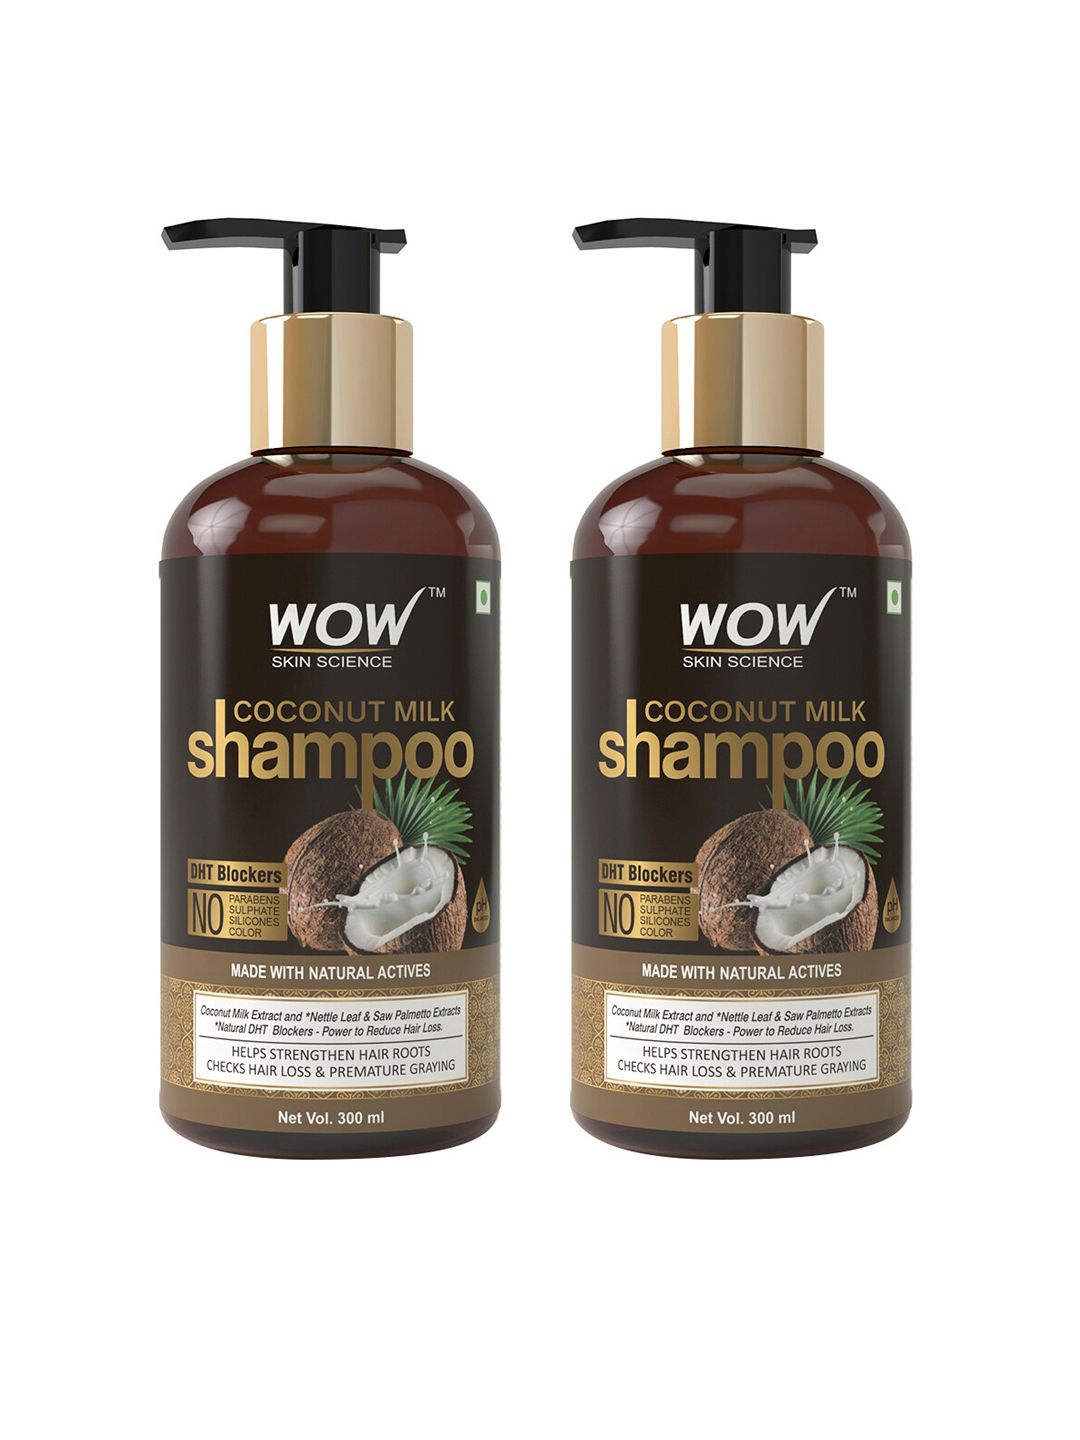 WOW SKIN SCIENCE Set of 2 Coconut Milk Shampoo - 300 ml each Price in India